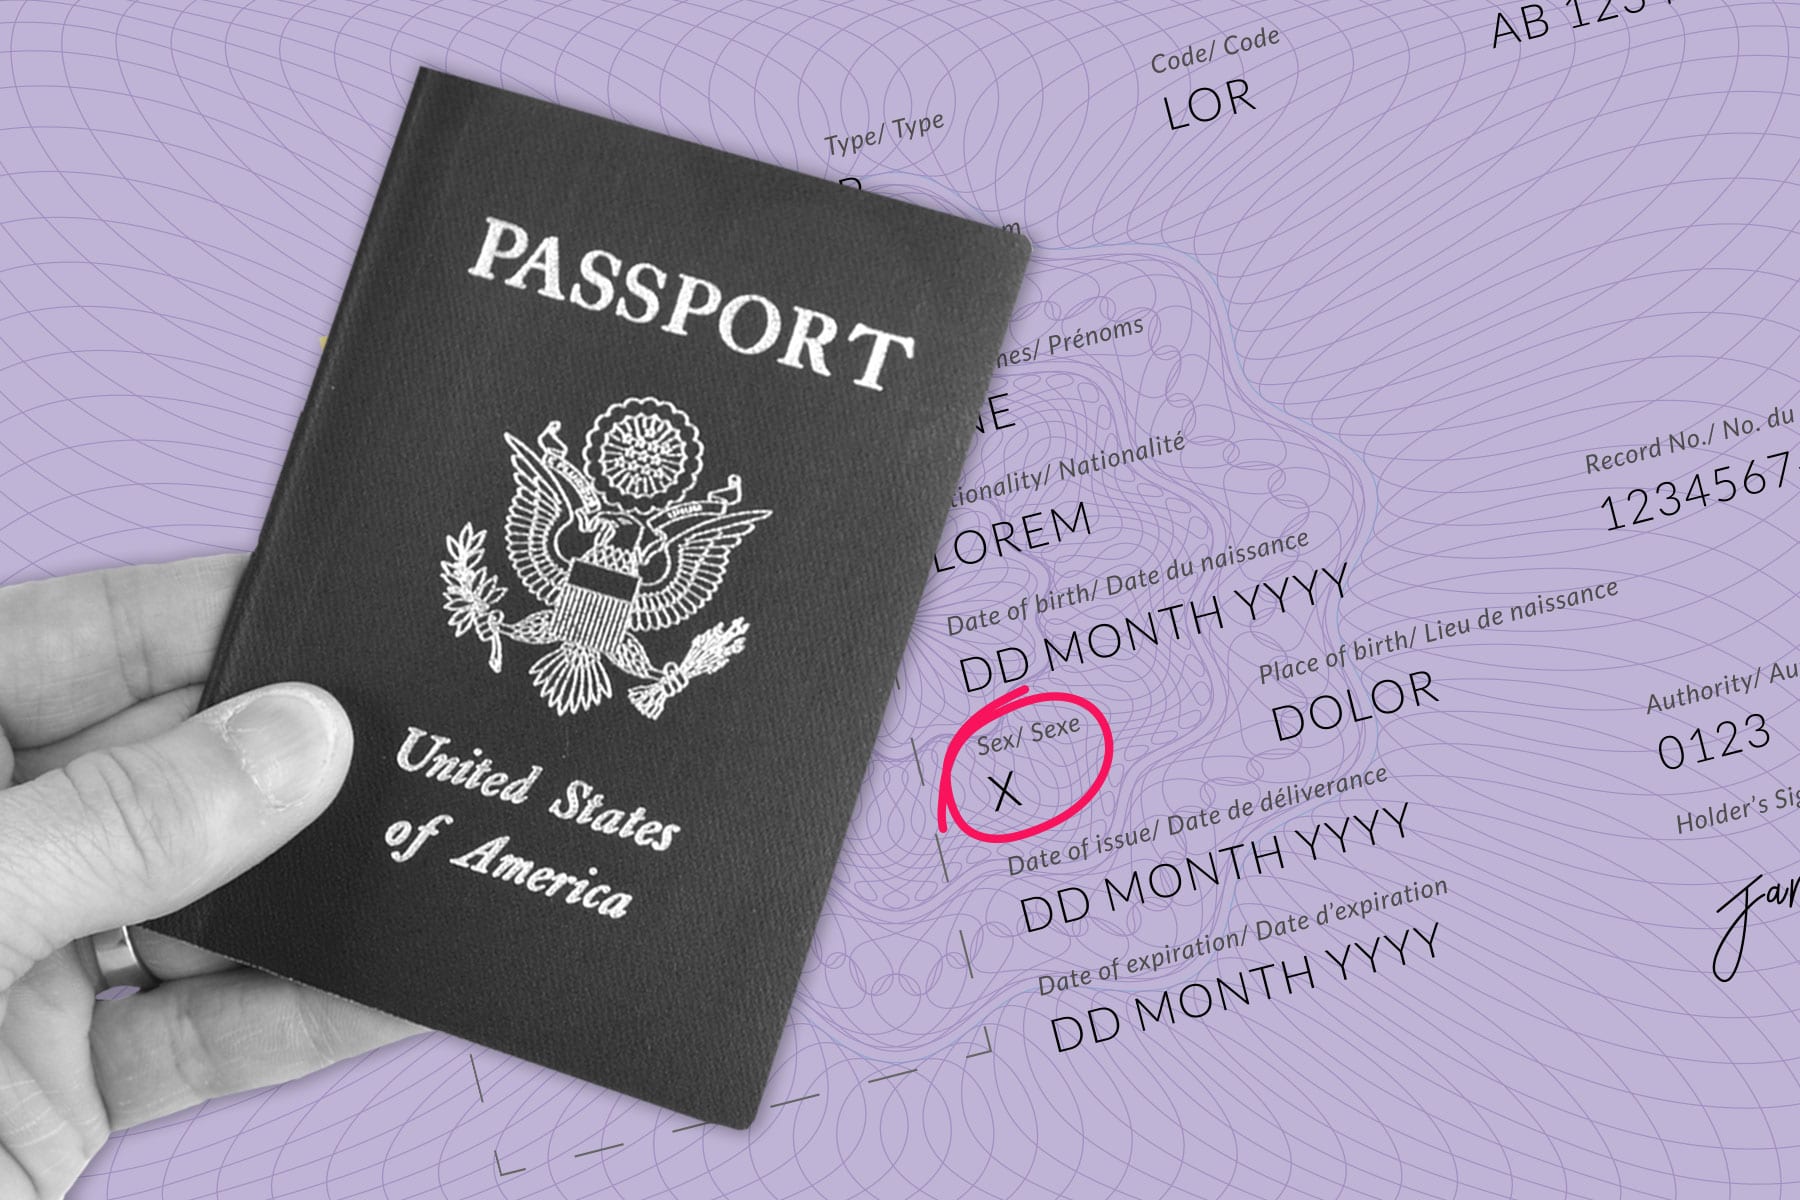 Image of passport and gender marker "x".